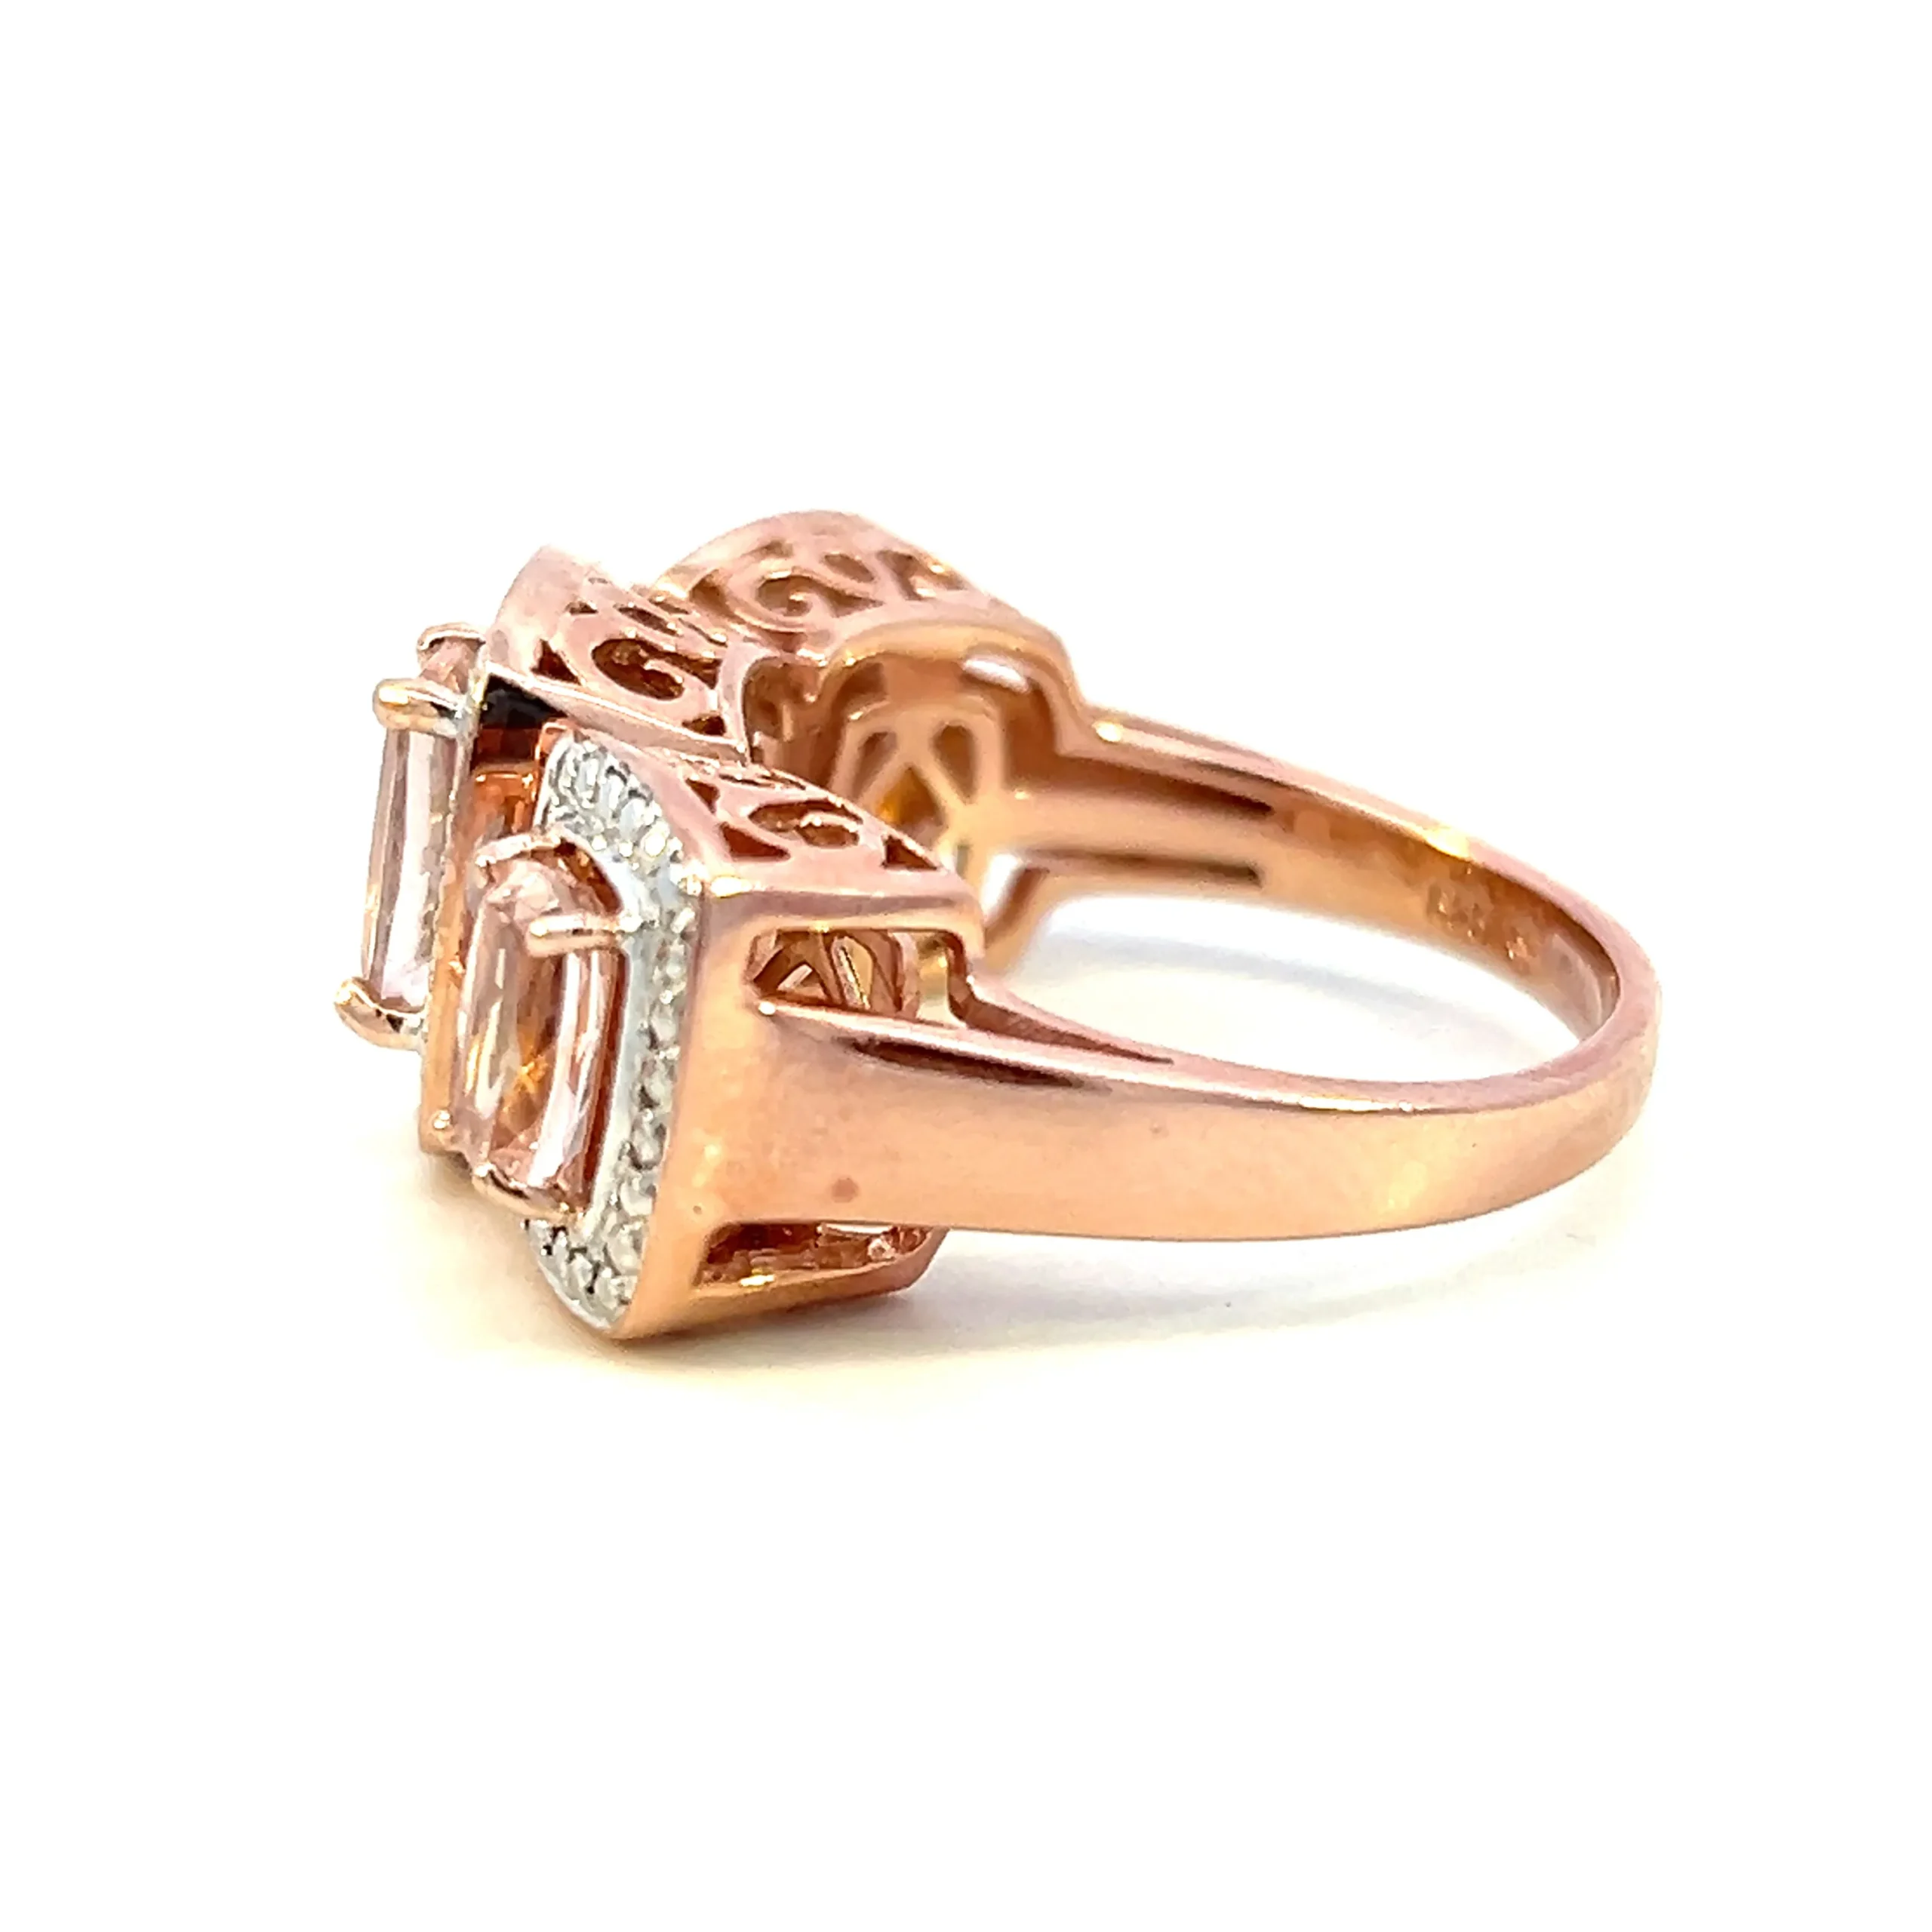 One estate rose gold vermeil three-stone ring containing 3 cushion-cut morganite each surrounded by a sterling silver beadwork halo